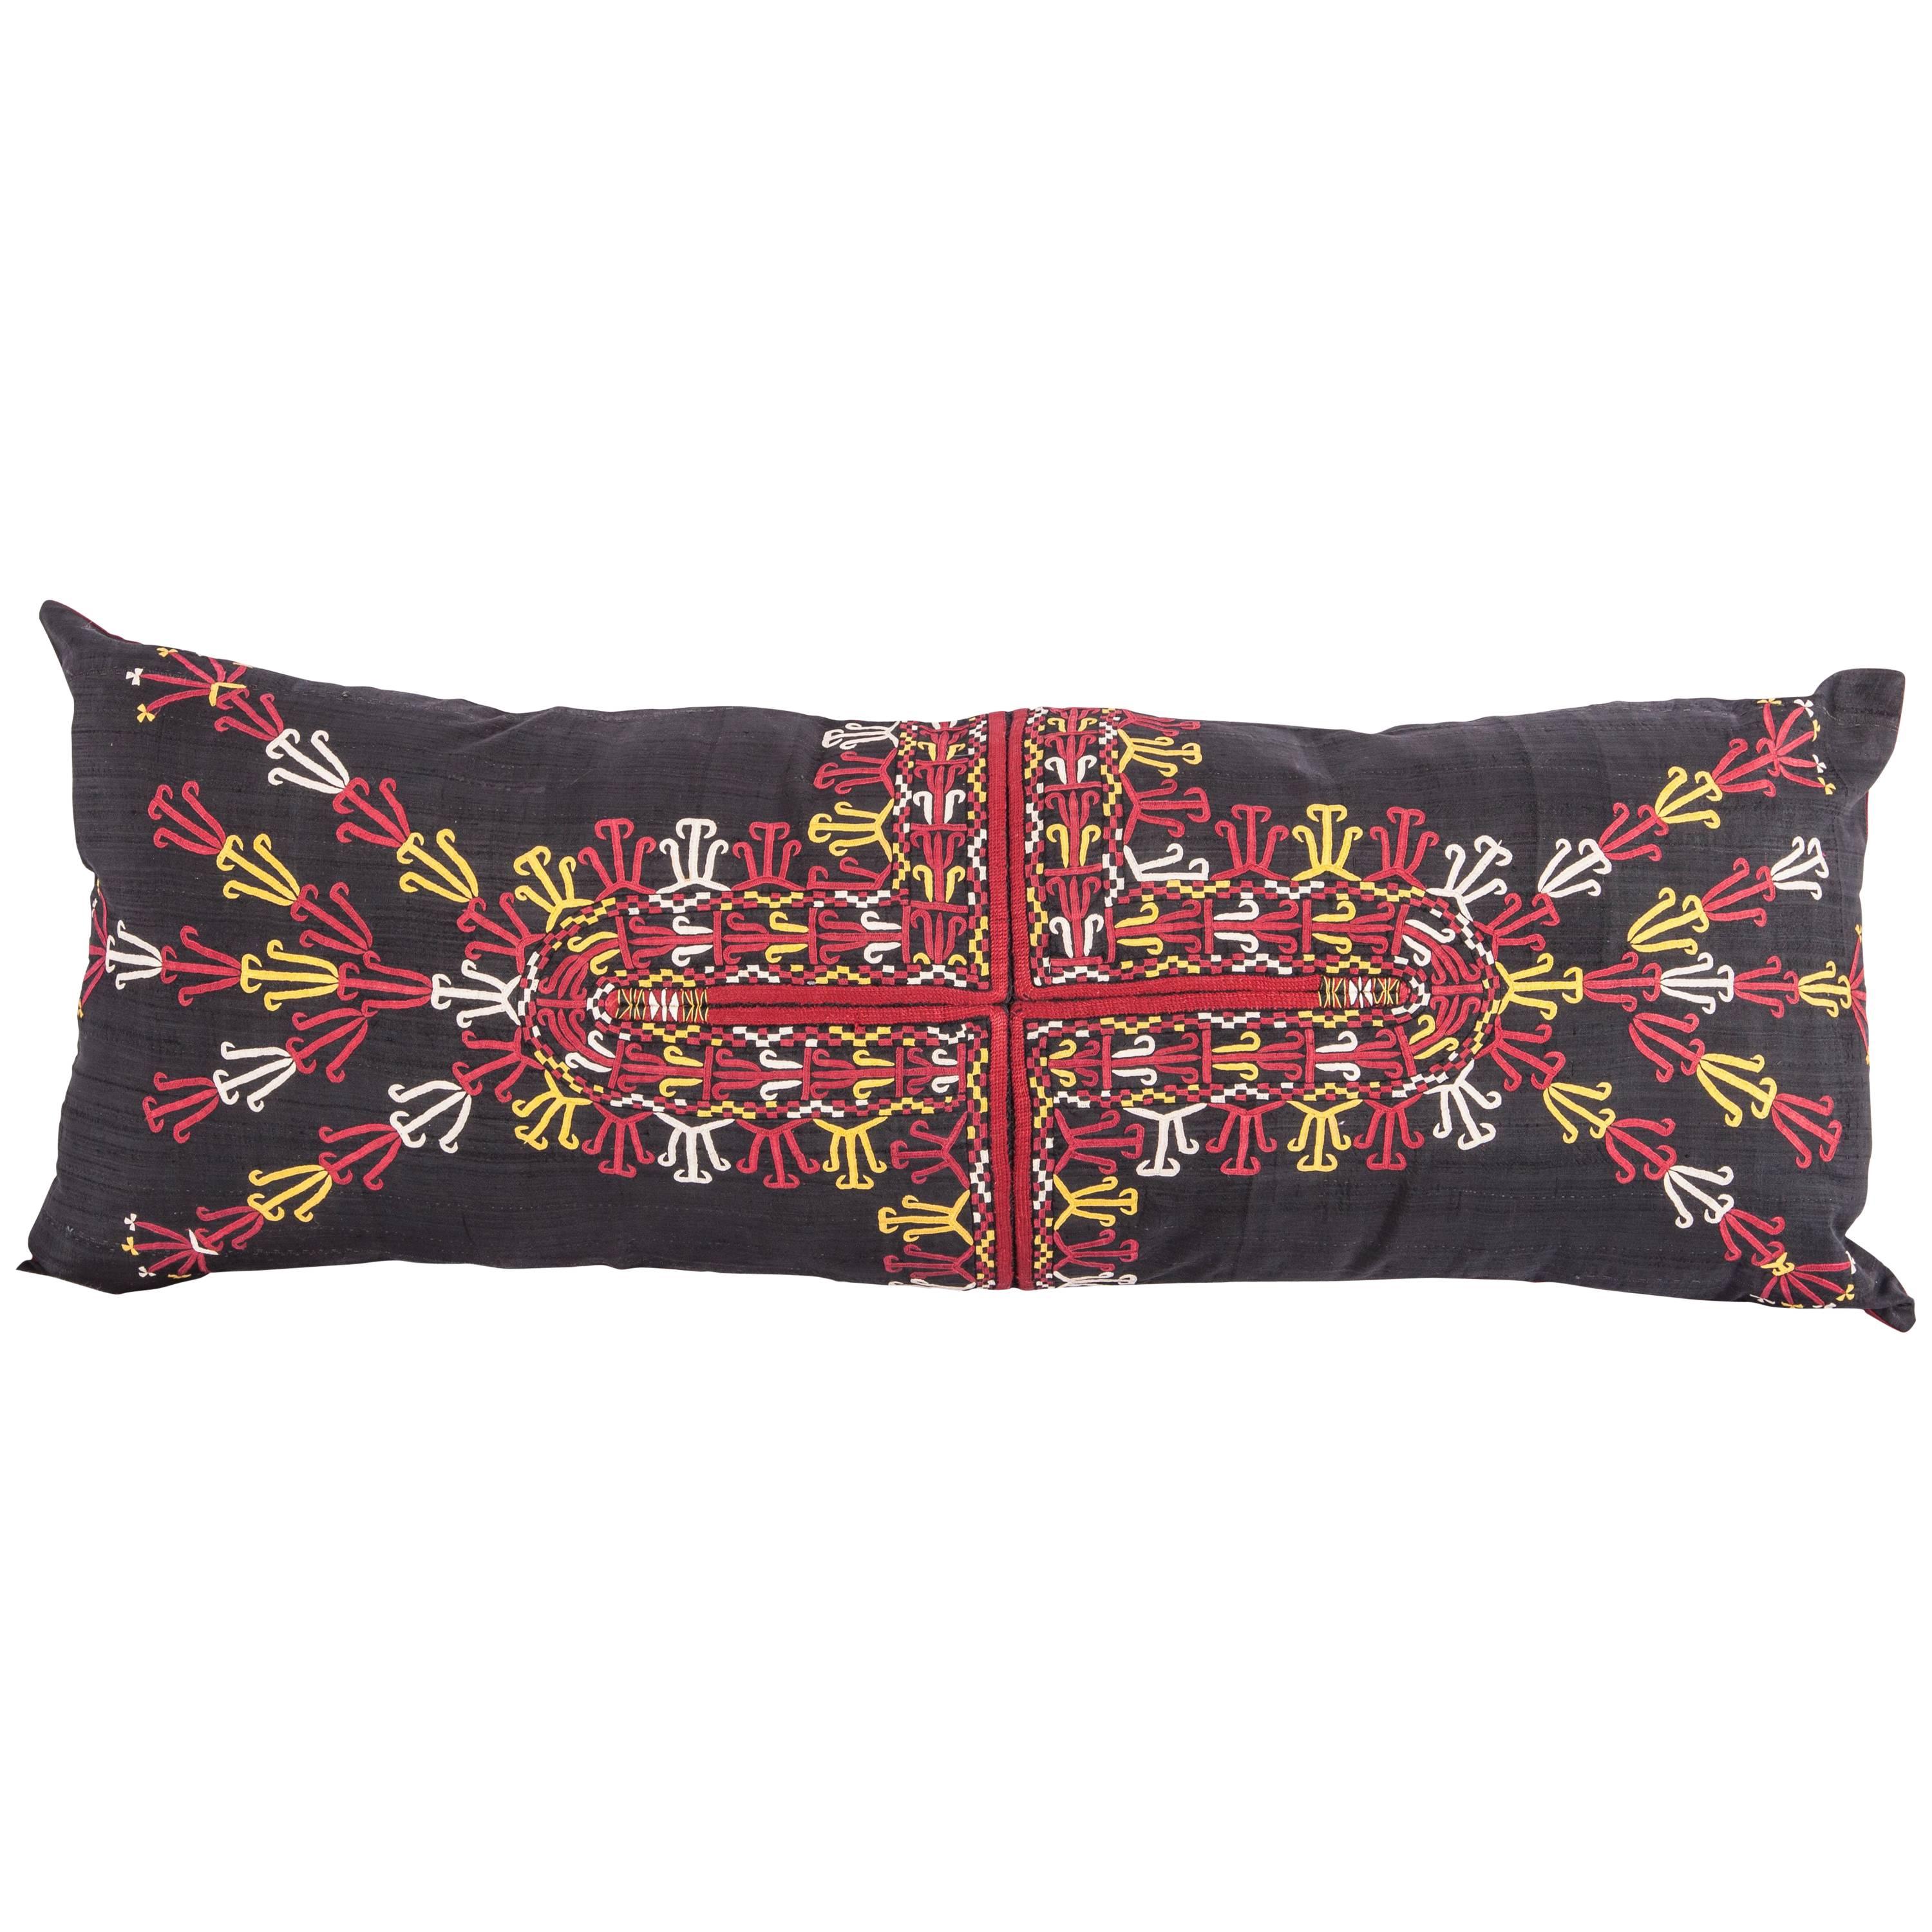 Pillow Case Fashioned from a Early 20th Century Turkmen Emroidered Silk Coat